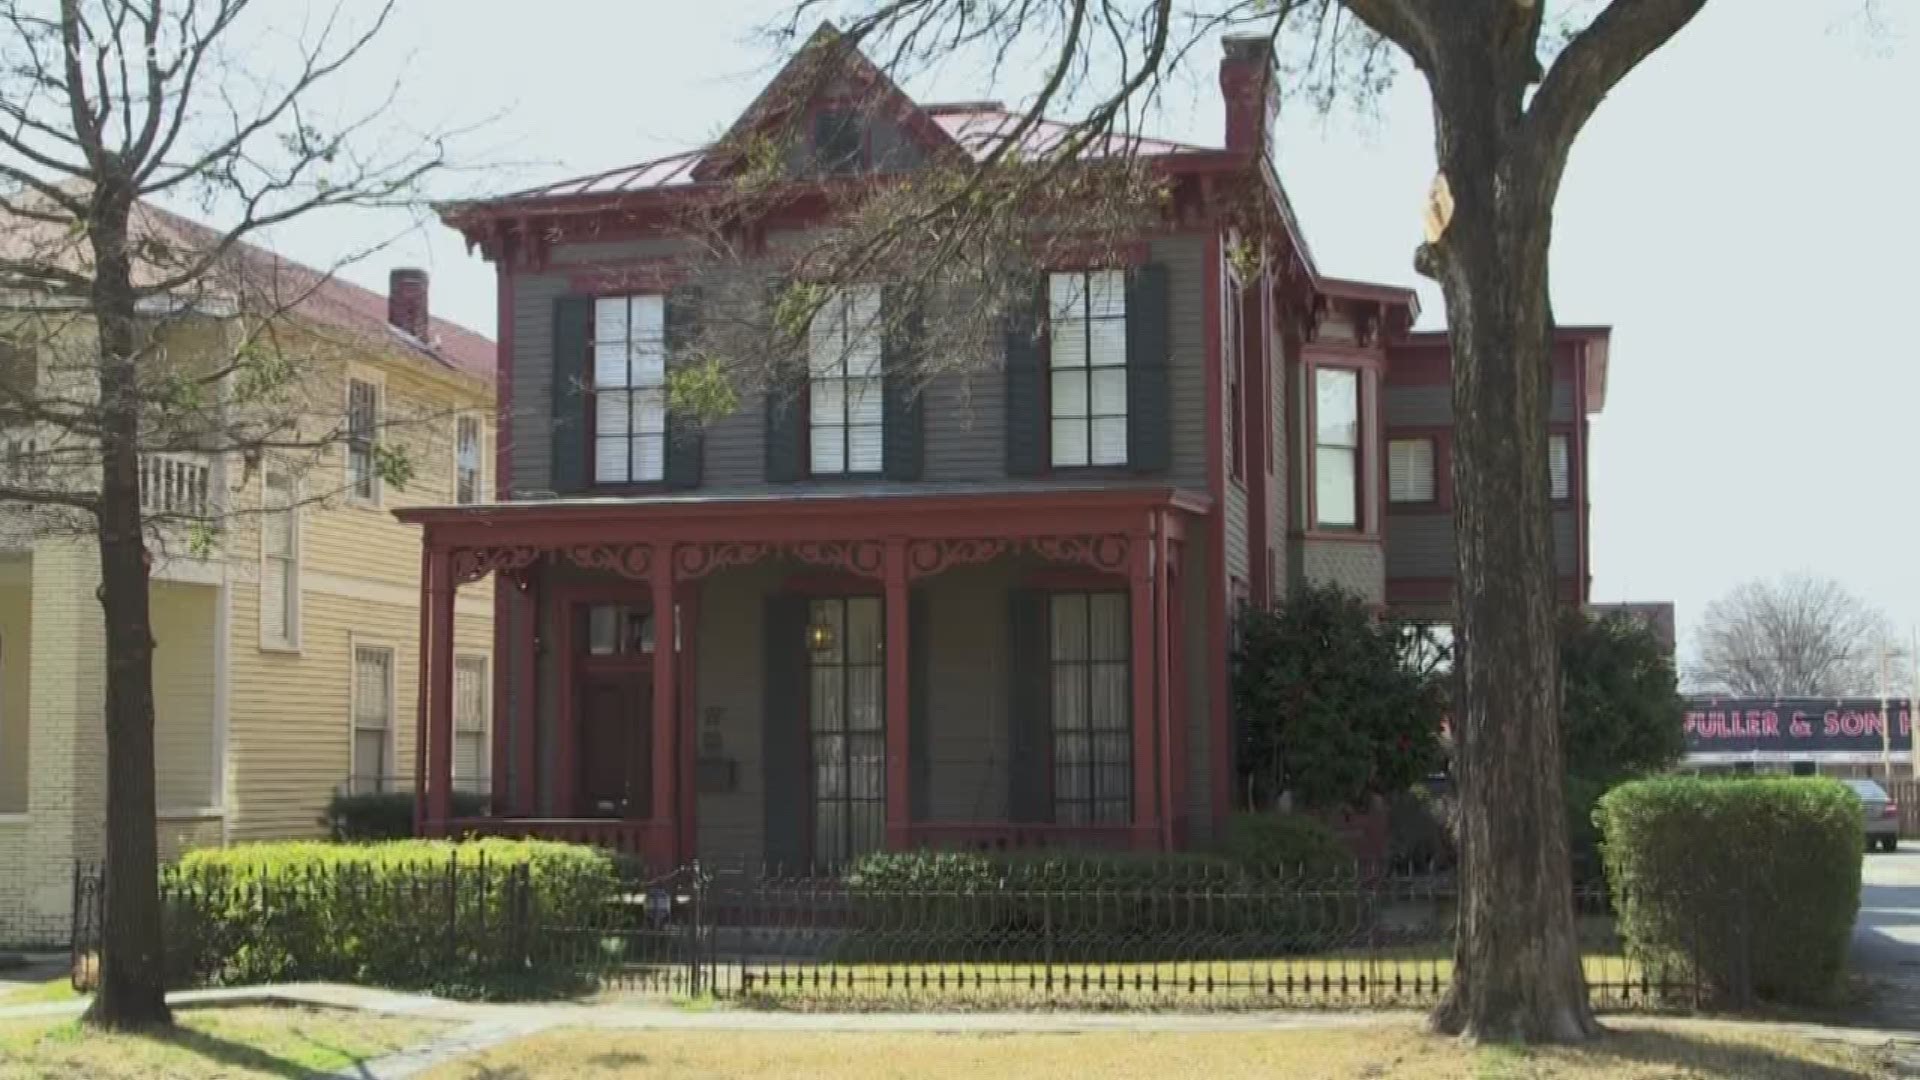 The 2019 QQA Spring Tour of Homes is this weekend May 11 & 12  featuring homes in MacArthur Park, Little Rock's oldest historic district.